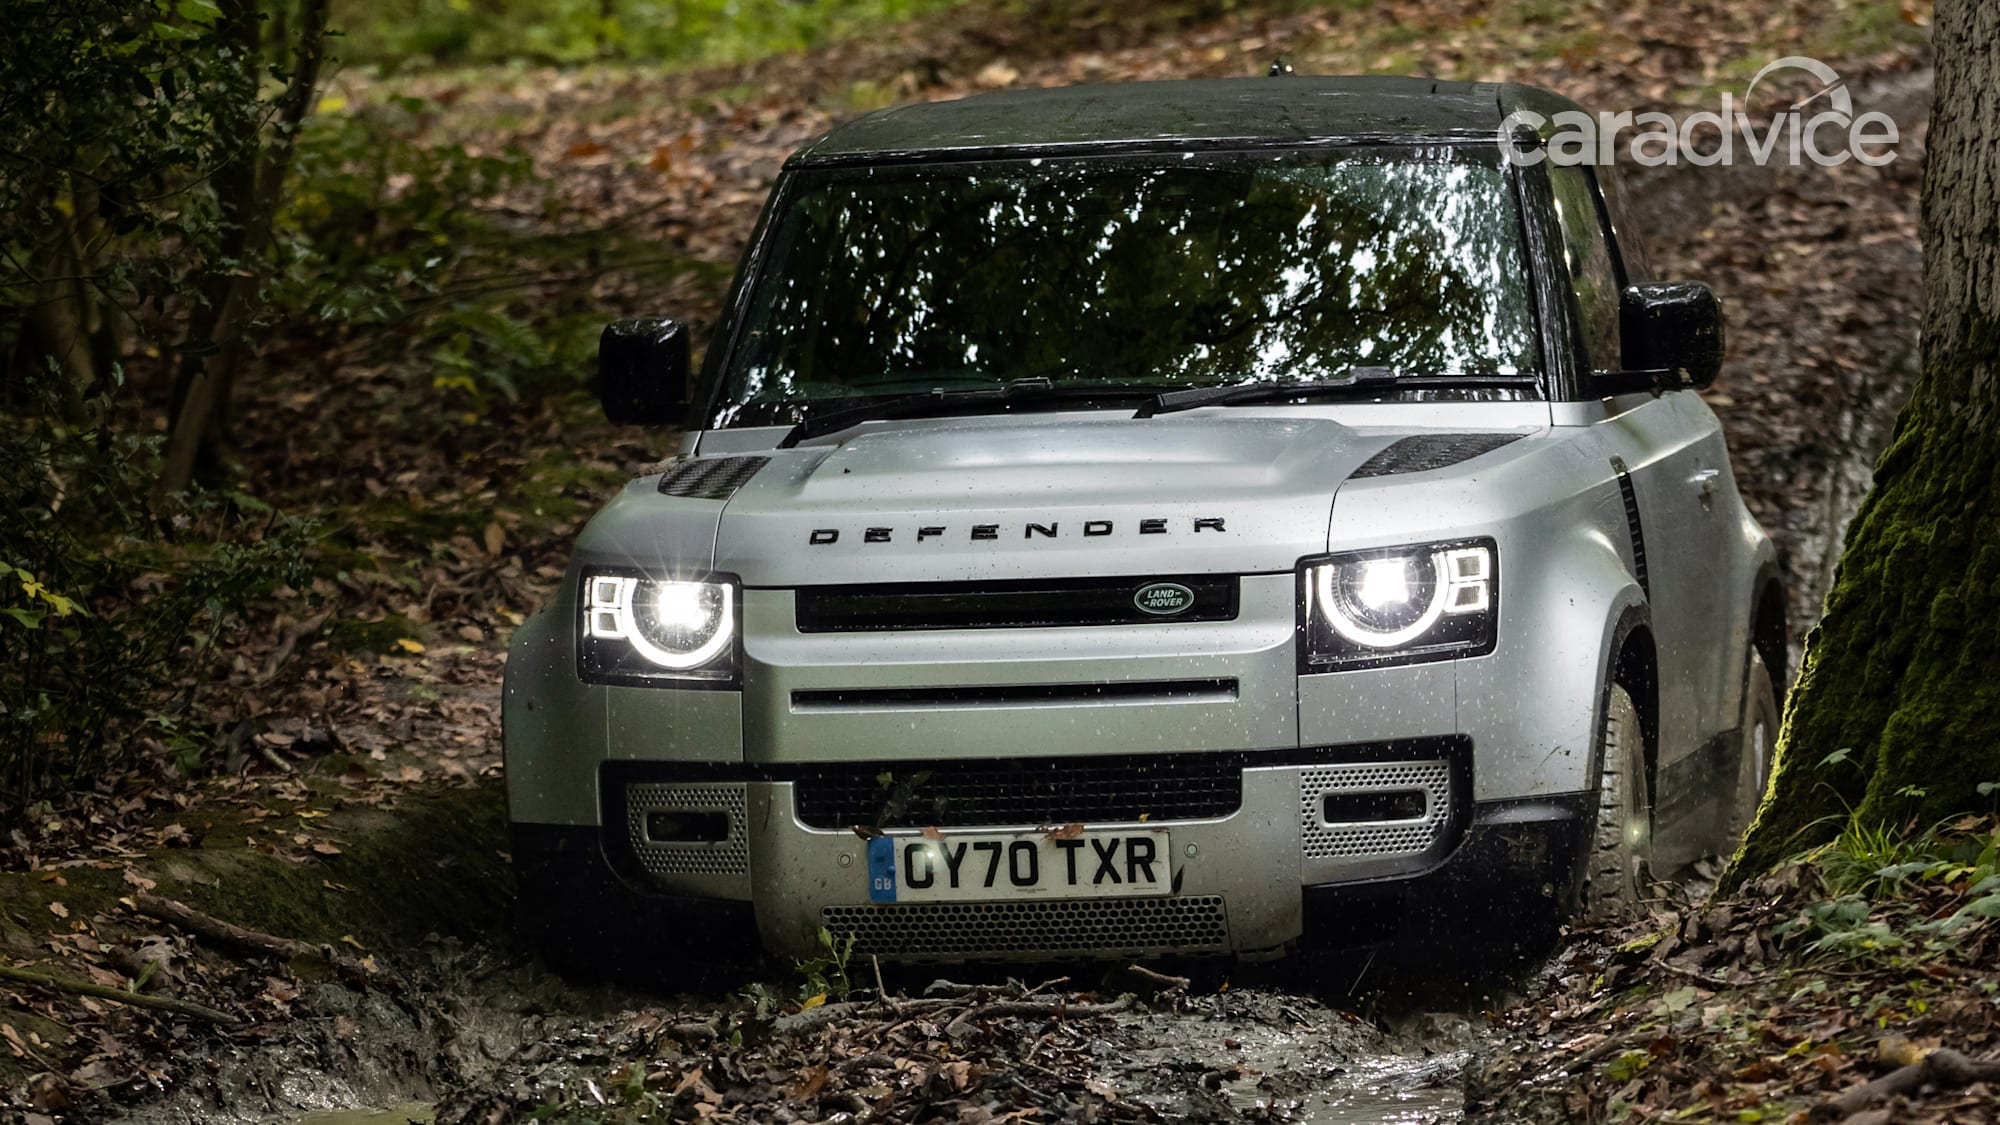 2021 Land Rover Defender 90 review | CarAdvice